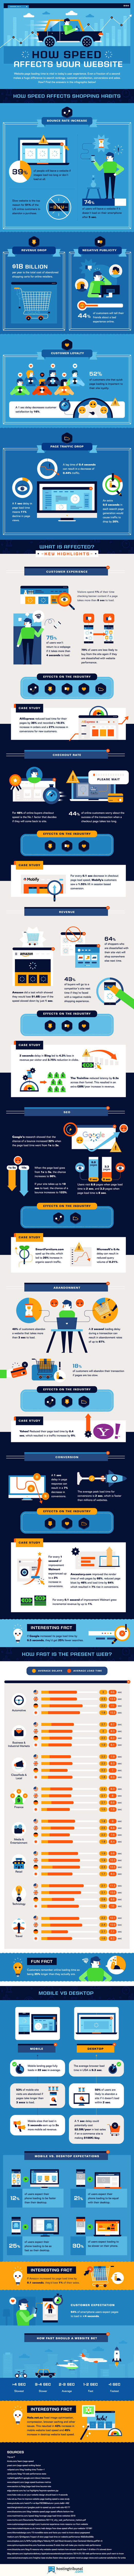 how speed affects your website infographic